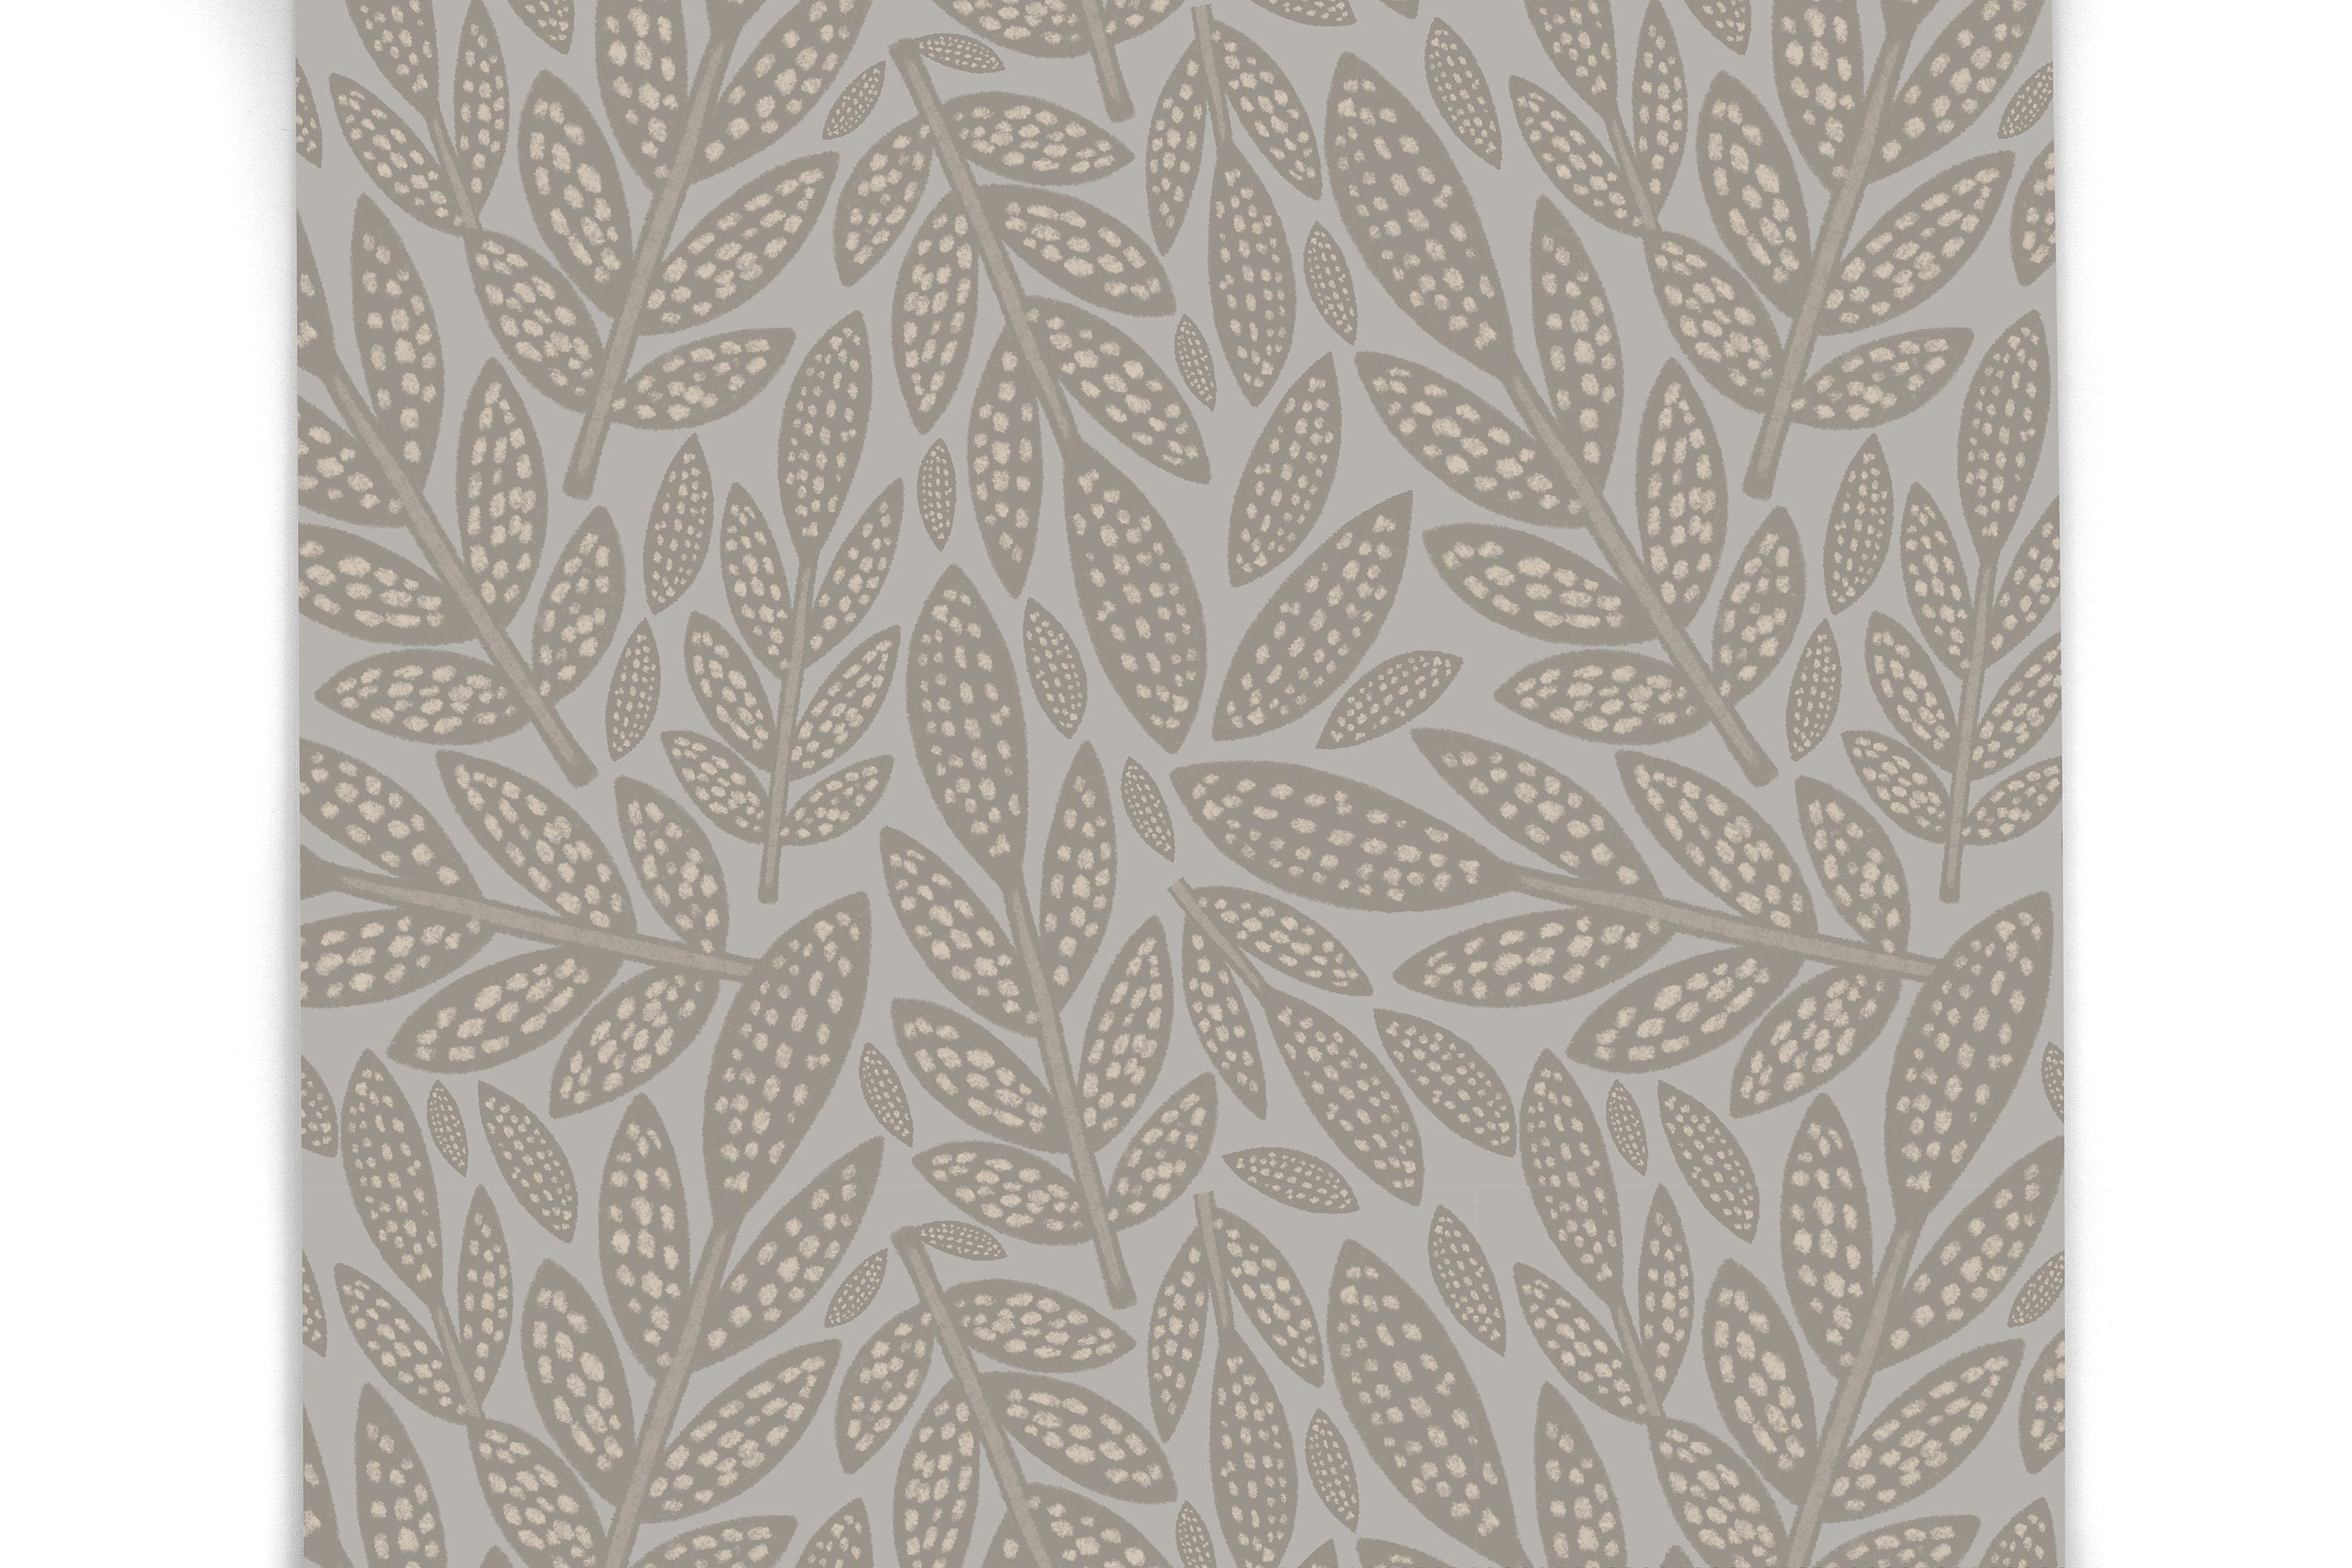 Dark Leaves Foliage Contact Paper | Peel And Stick Wallpaper | Removable Wallpaper | Shelf Liner | Drawer Liner | Peel and Stick Paper 789 - JamesAndColors